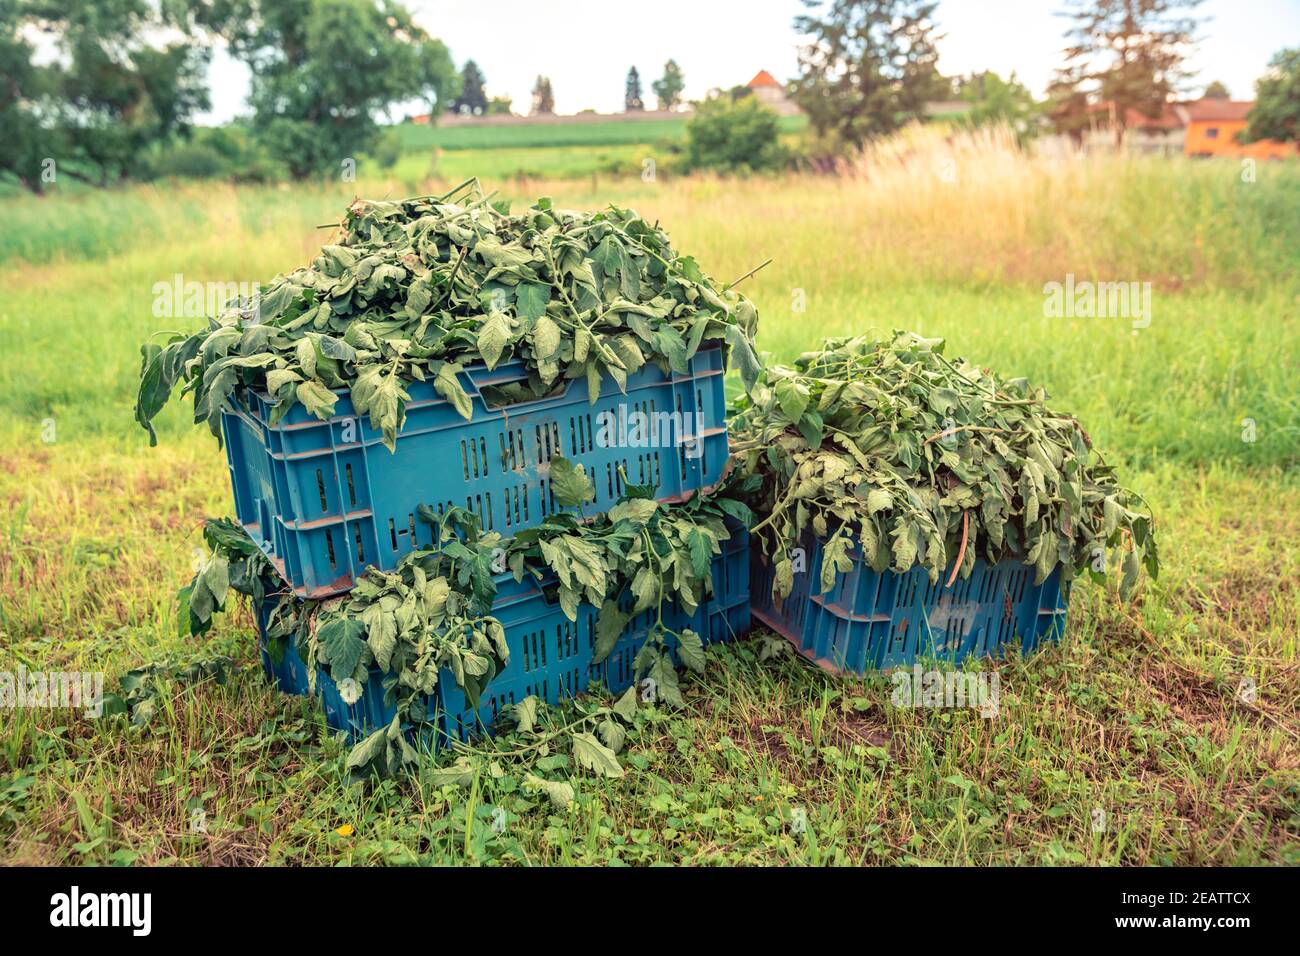 weeds in crates in a field on a farm Stock Photo